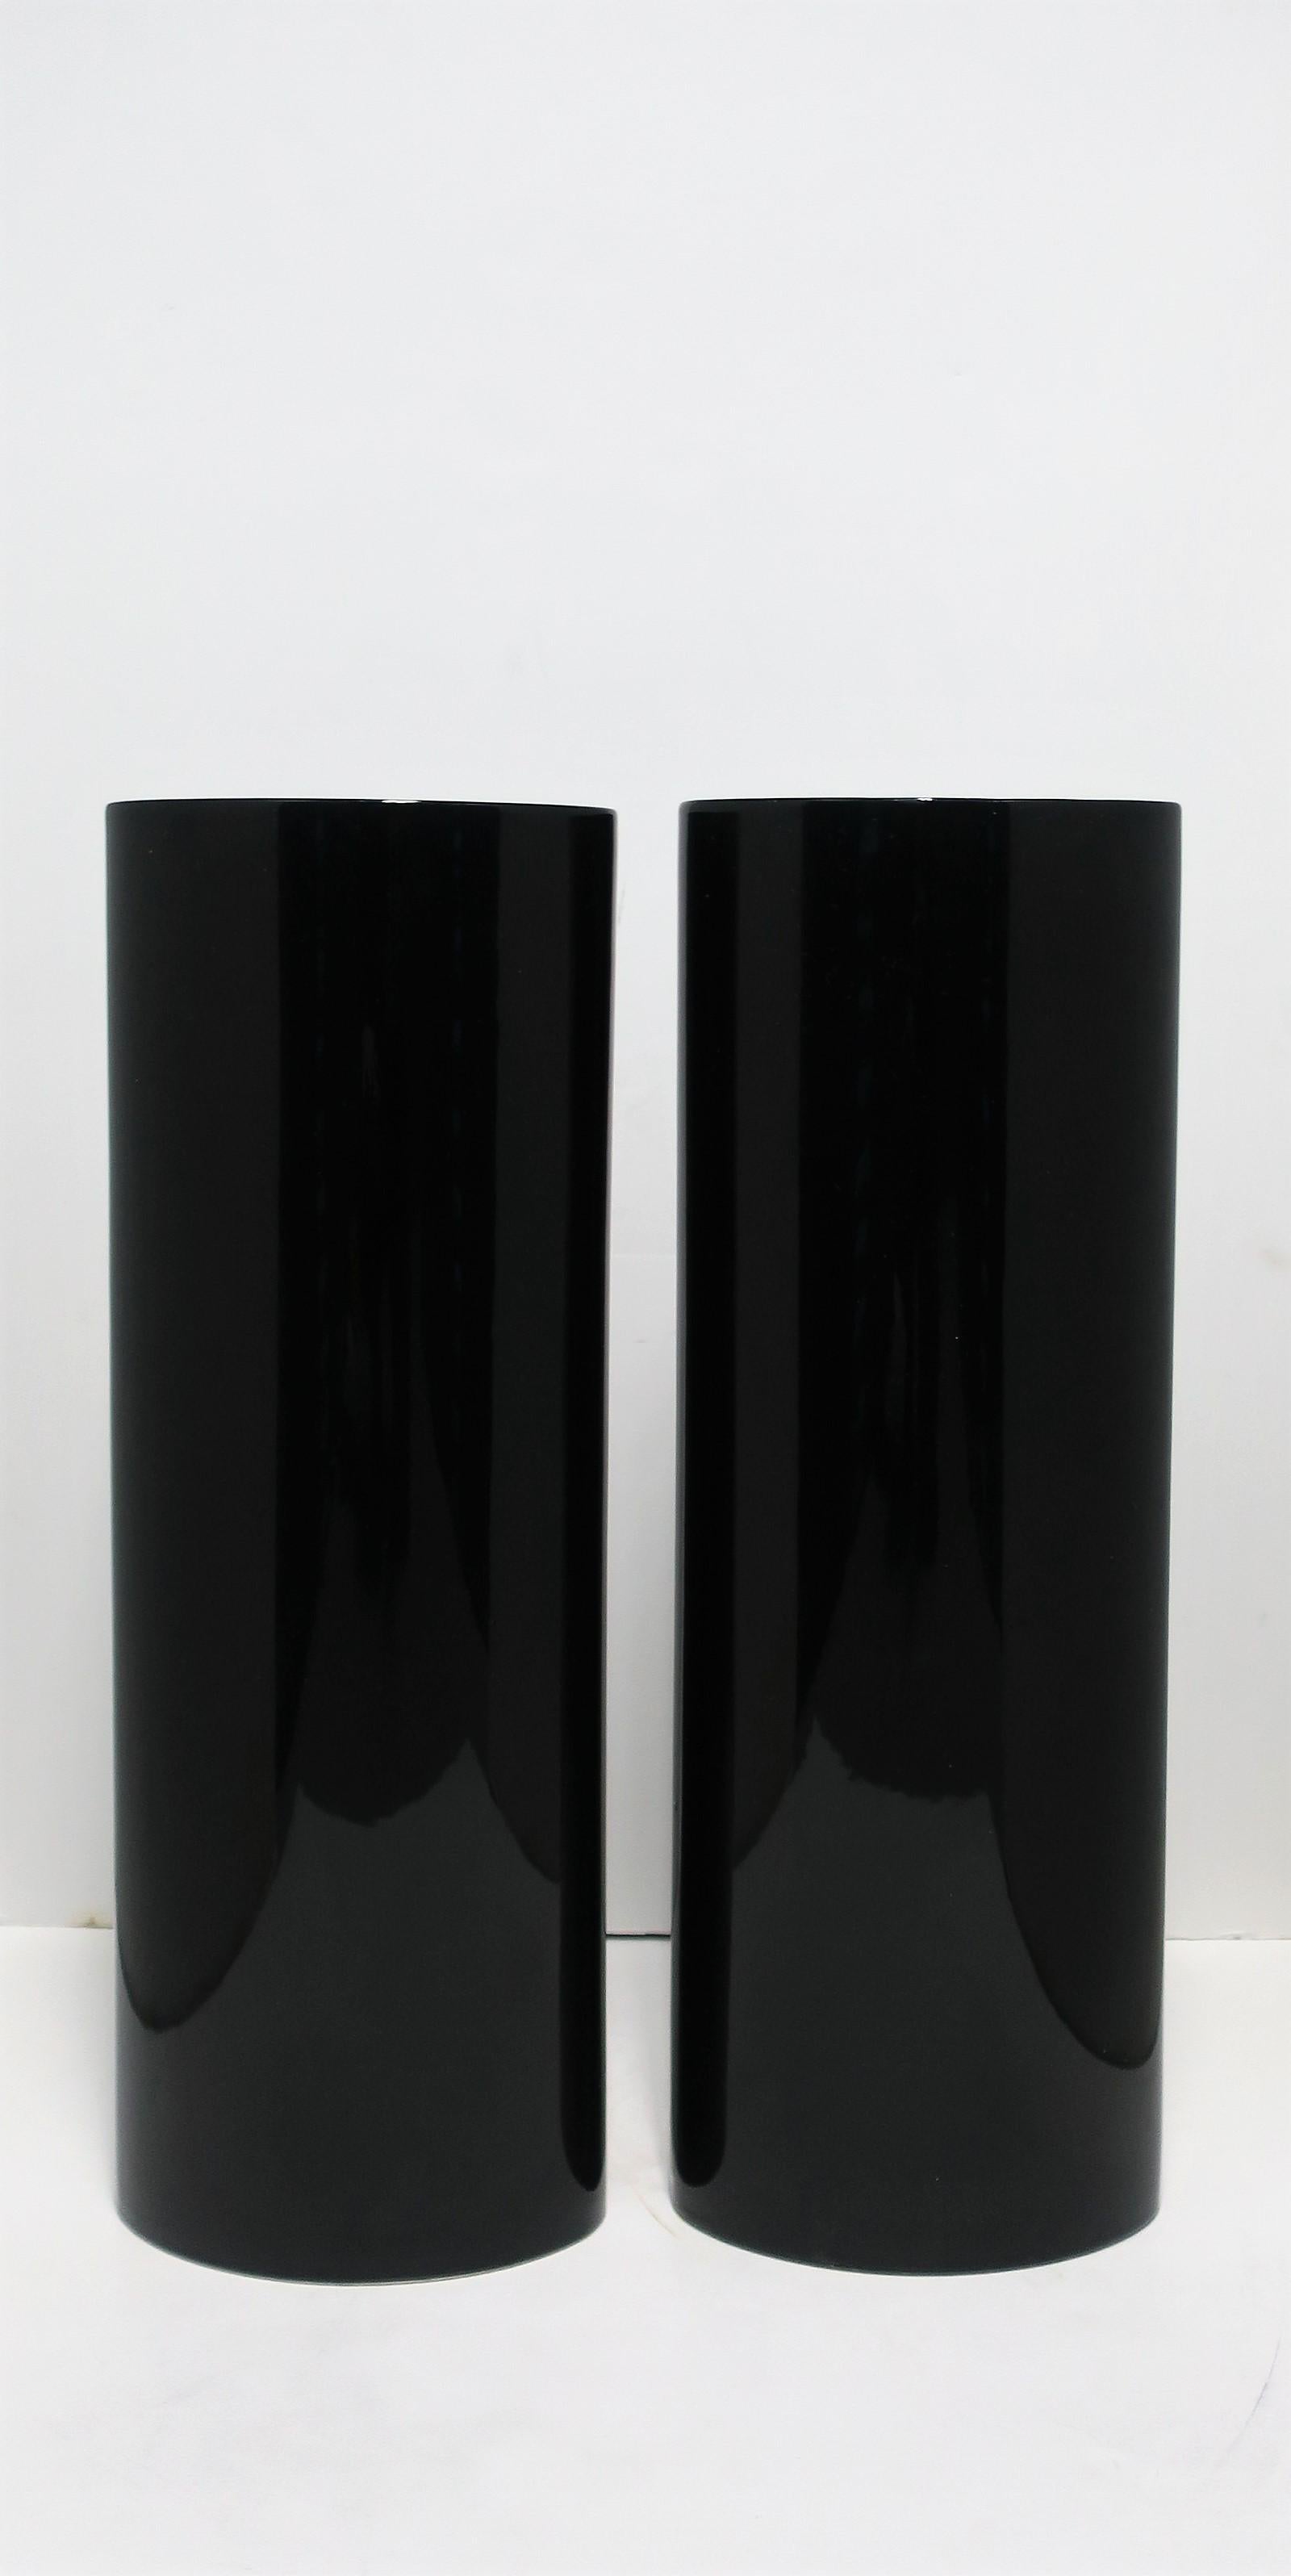 A beautiful pair of very tall European organic modern style black ceramic vases, Portugal, circa late-20th century, 1990s. Glazed ceramic vases have a high-gloss or lacquer look and feel. In the style of organic modern; a versatile pair of vases or